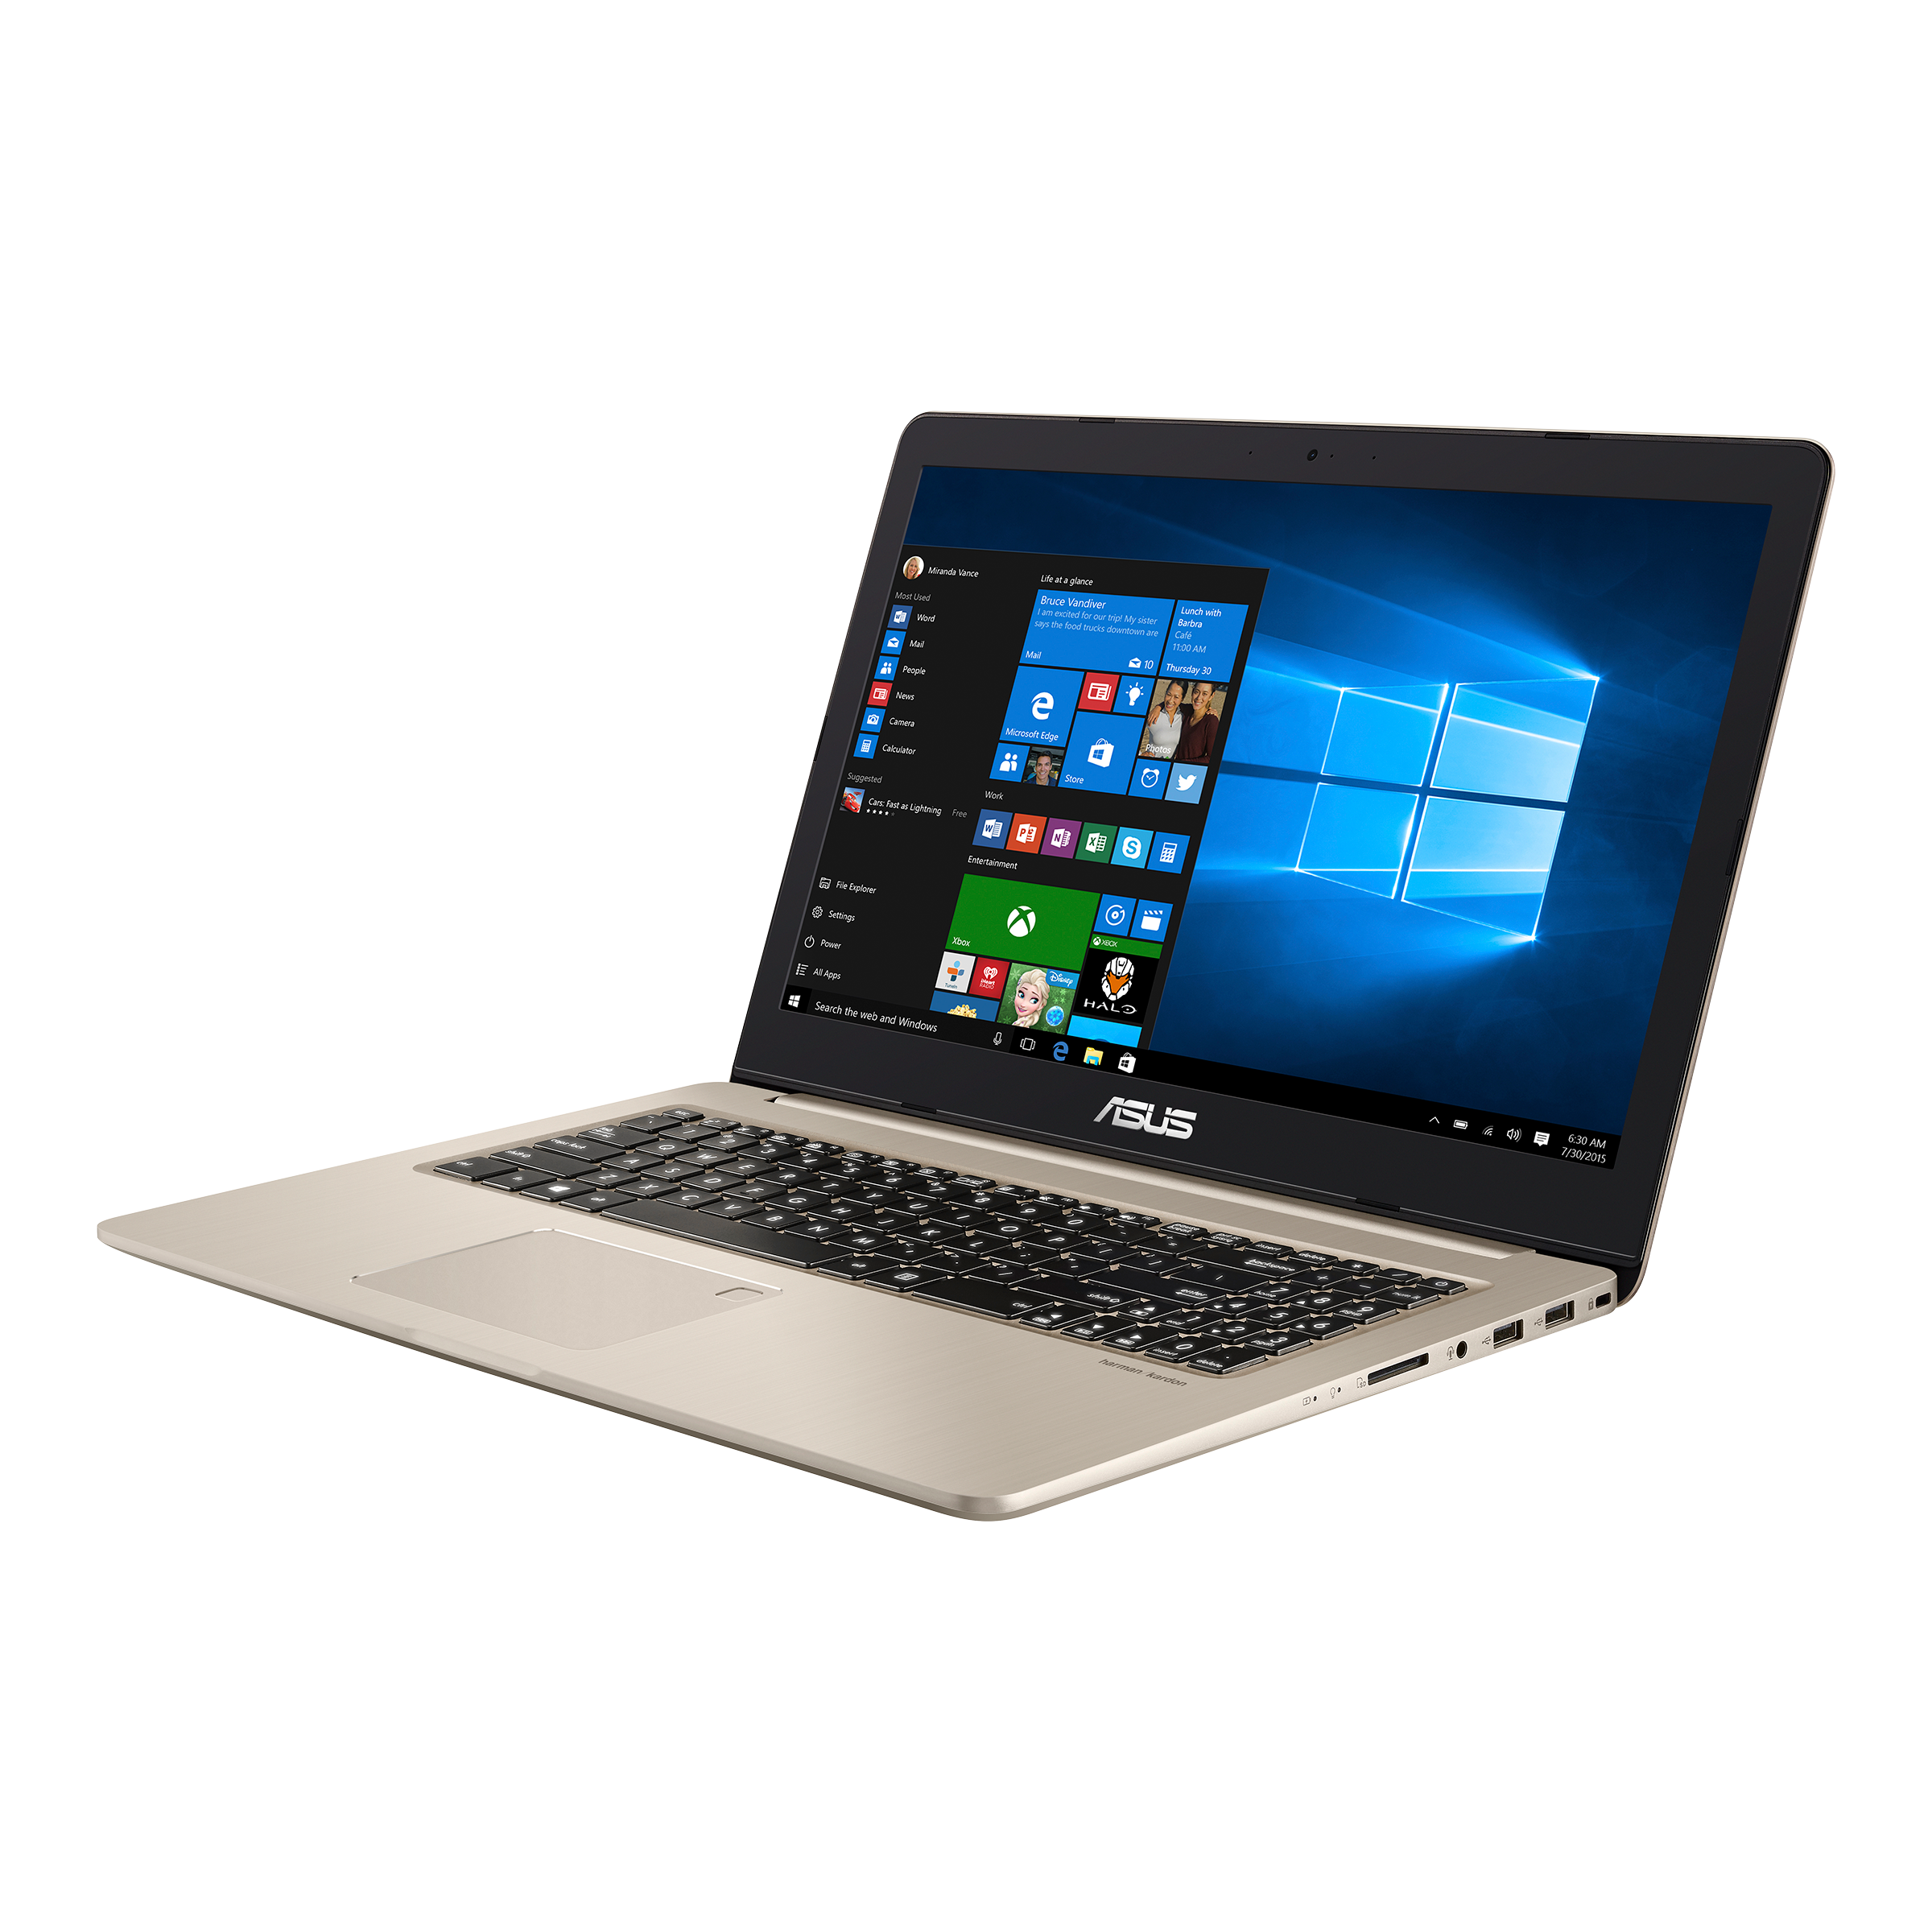 ASUS Vivobook Pro 15 N580｜Laptops For Home｜ASUS USA